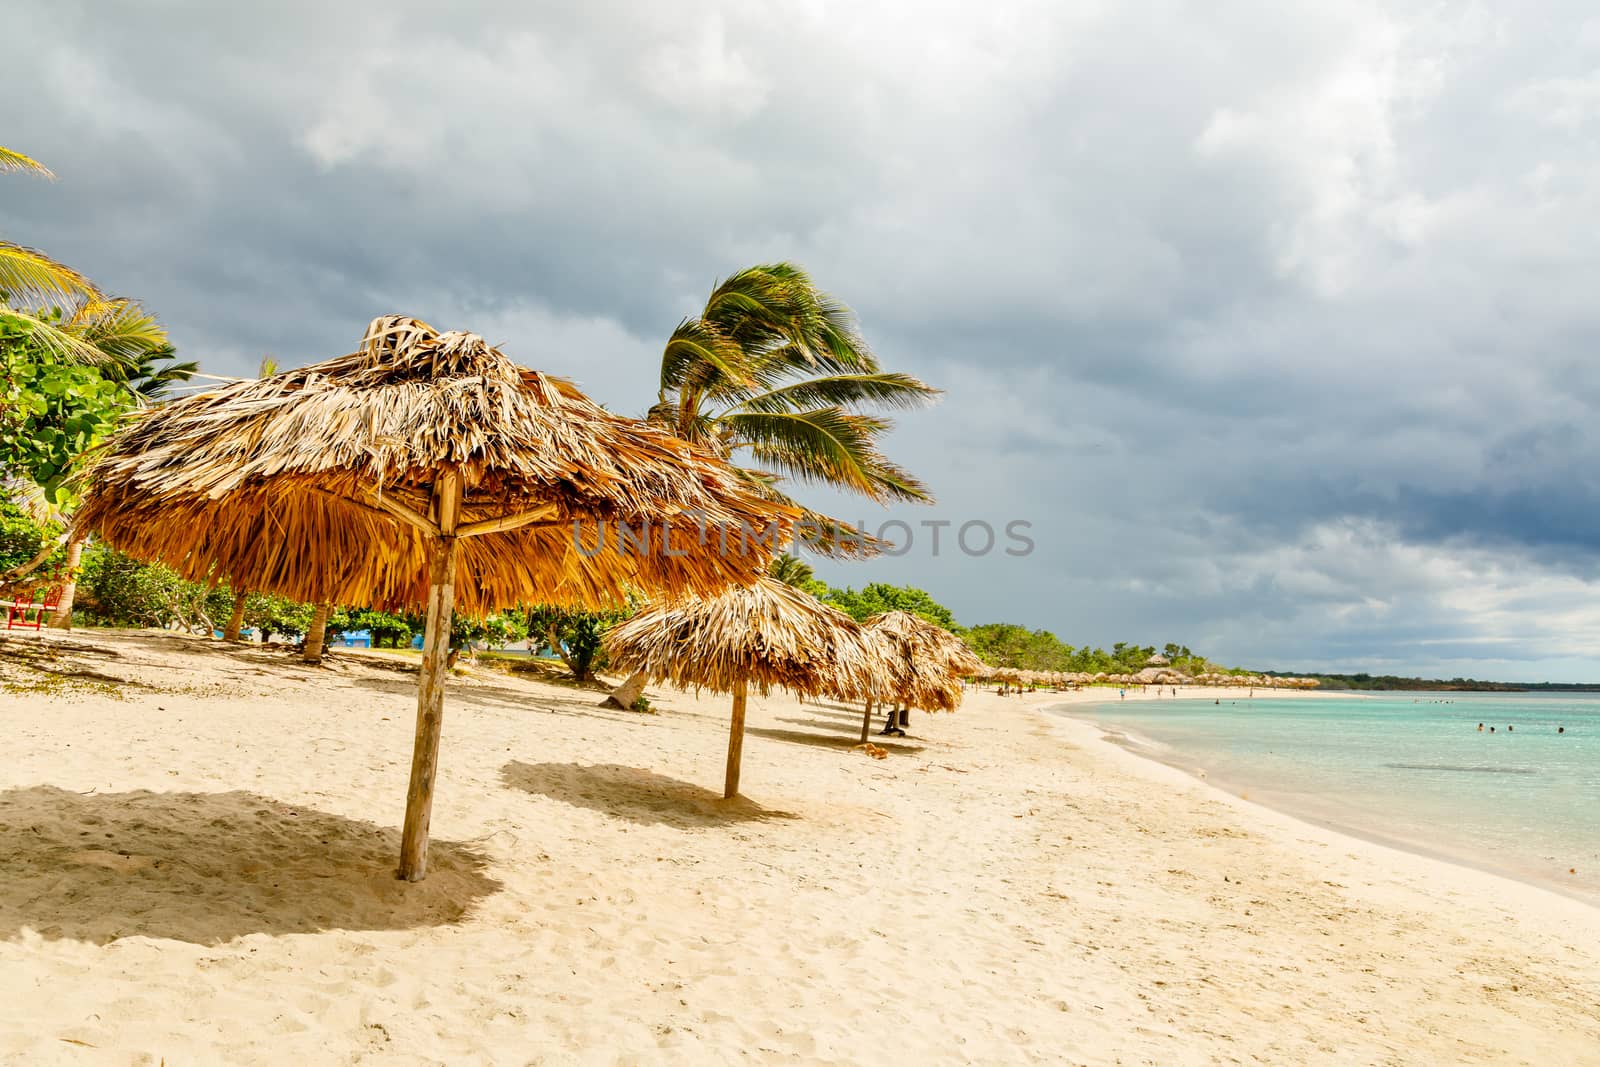 Rancho Luna sandy beach with palms and straw umrellas on the sho by ambeon